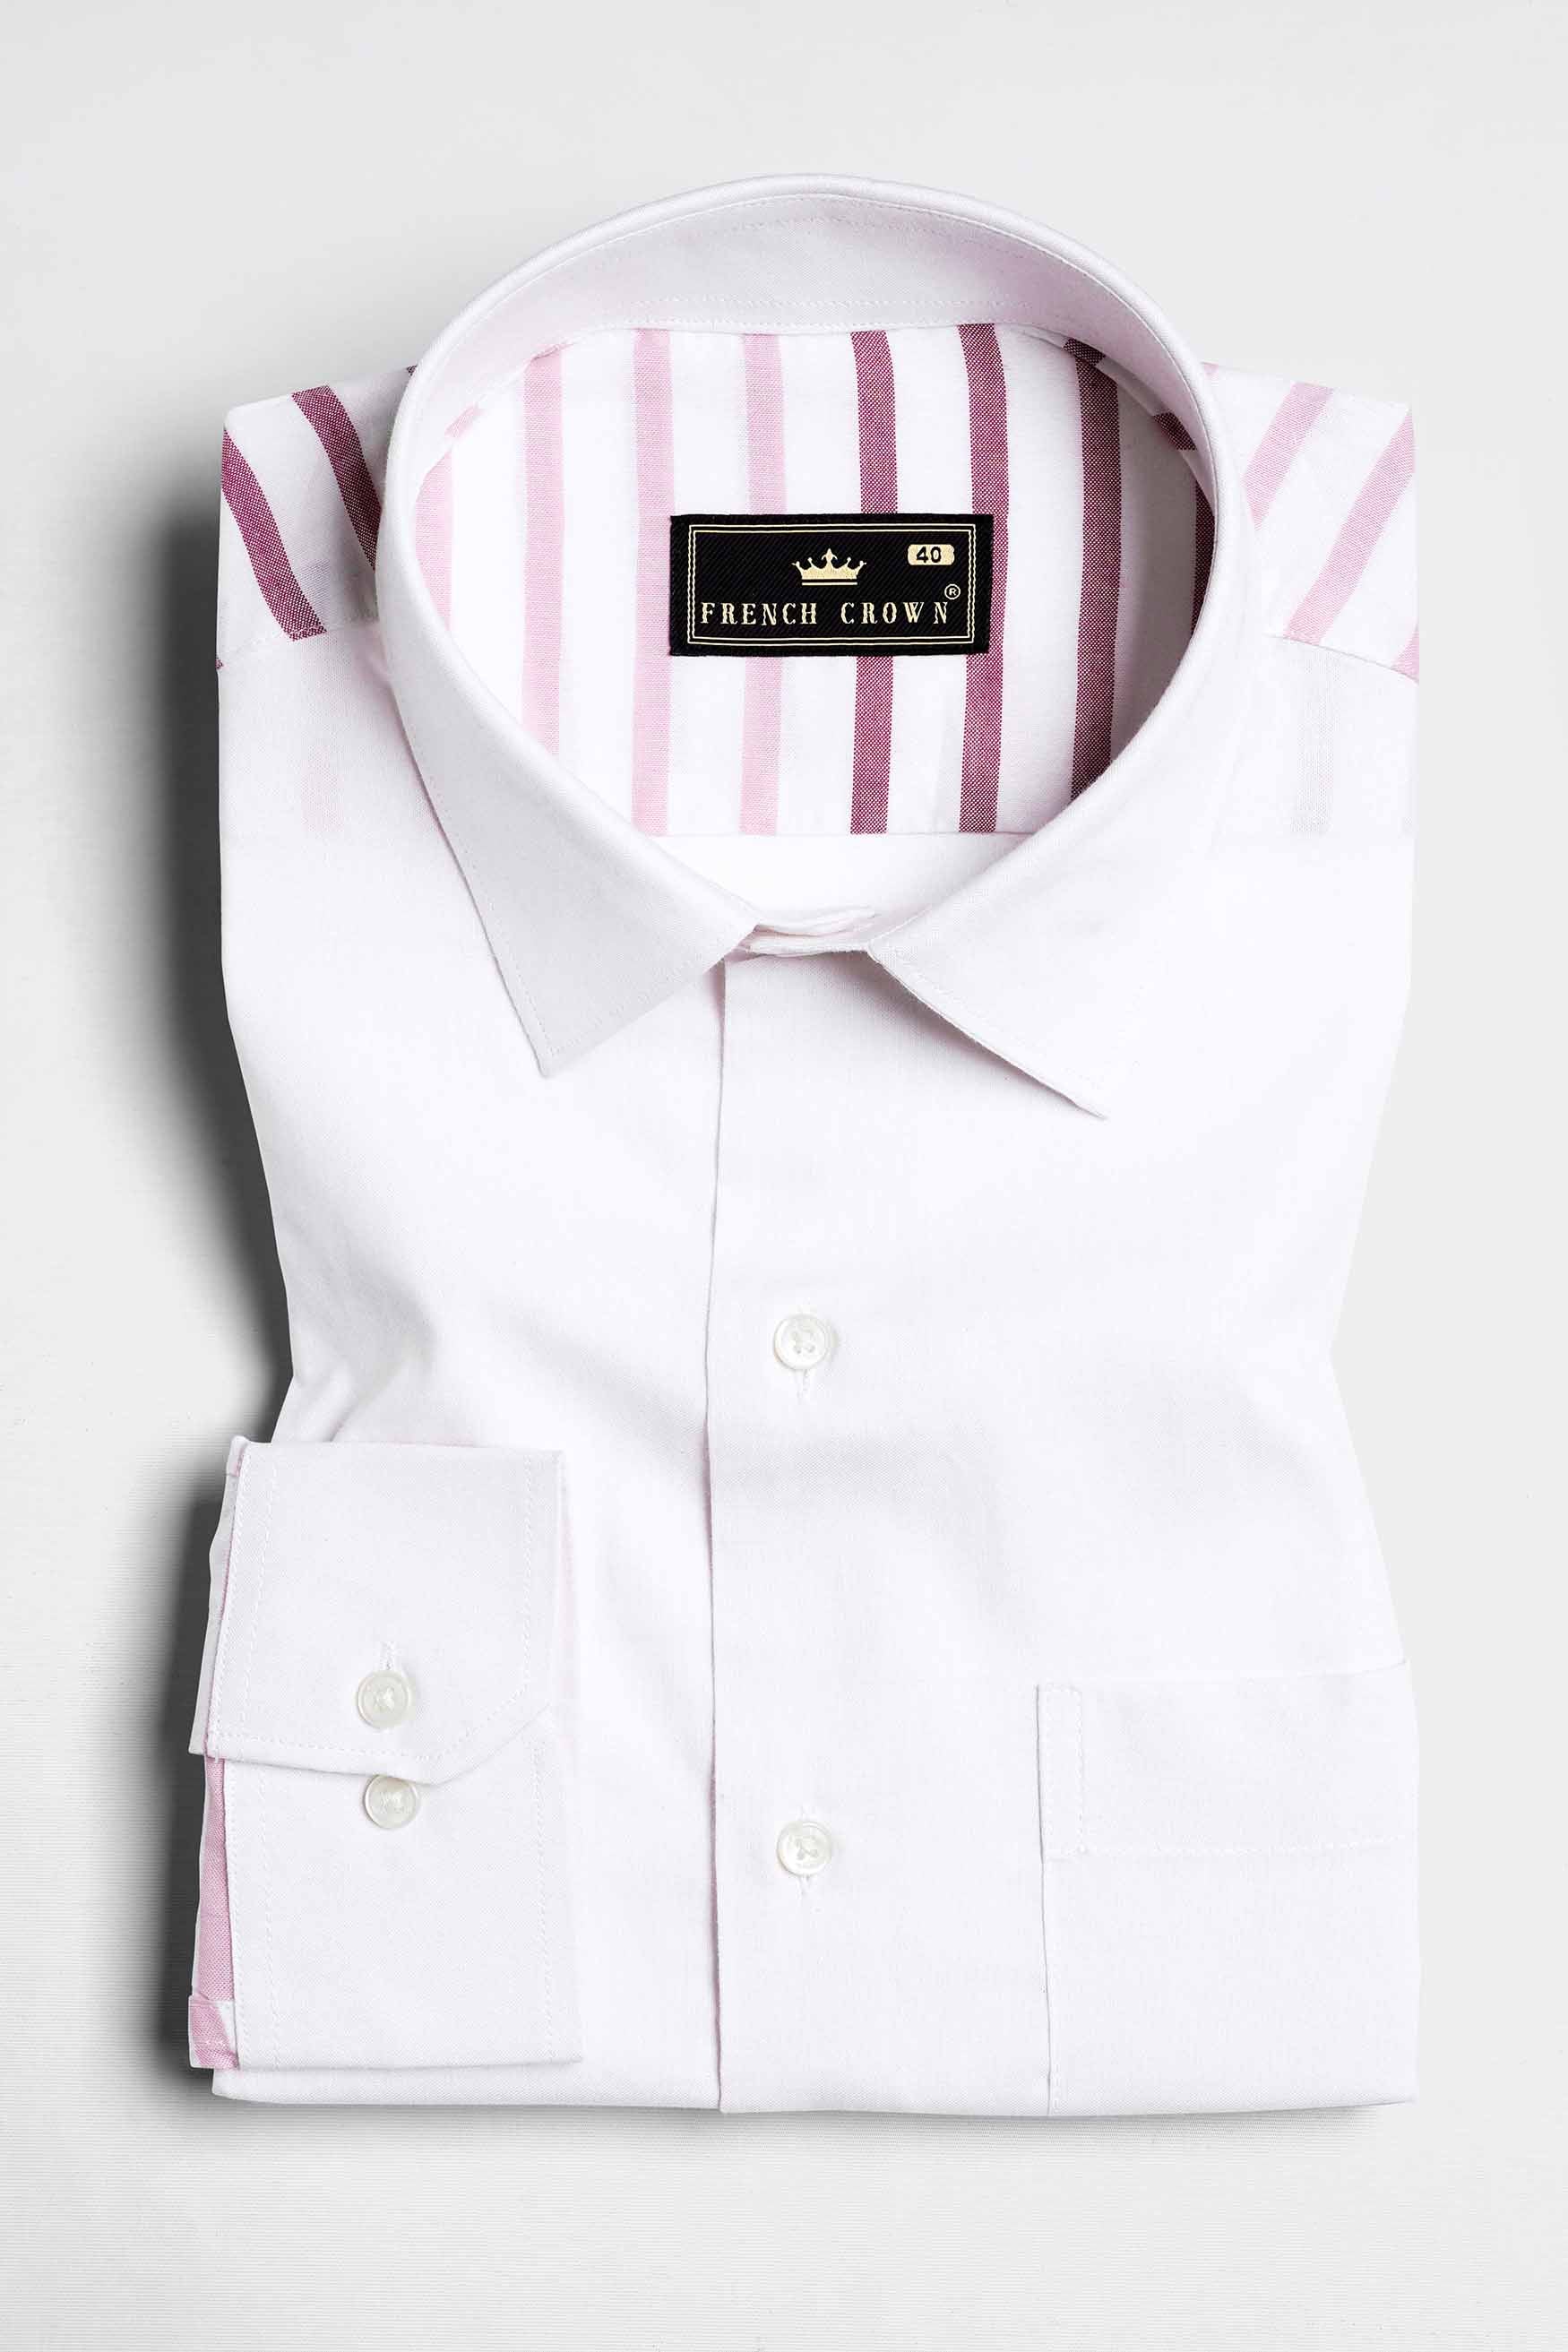 Bright White with Bashful Pink Striped Royal Oxford Shirt 11624-WCC-38, 11624-WCC-H-38, 11624-WCC-39, 11624-WCC-H-39, 11624-WCC-40, 11624-WCC-H-40, 11624-WCC-42, 11624-WCC-H-42, 11624-WCC-44, 11624-WCC-H-44, 11624-WCC-46, 11624-WCC-H-46, 11624-WCC-48, 11624-WCC-H-48, 11624-WCC-50, 11624-WCC-H-50, 11624-WCC-52, 11624-WCC-H-52